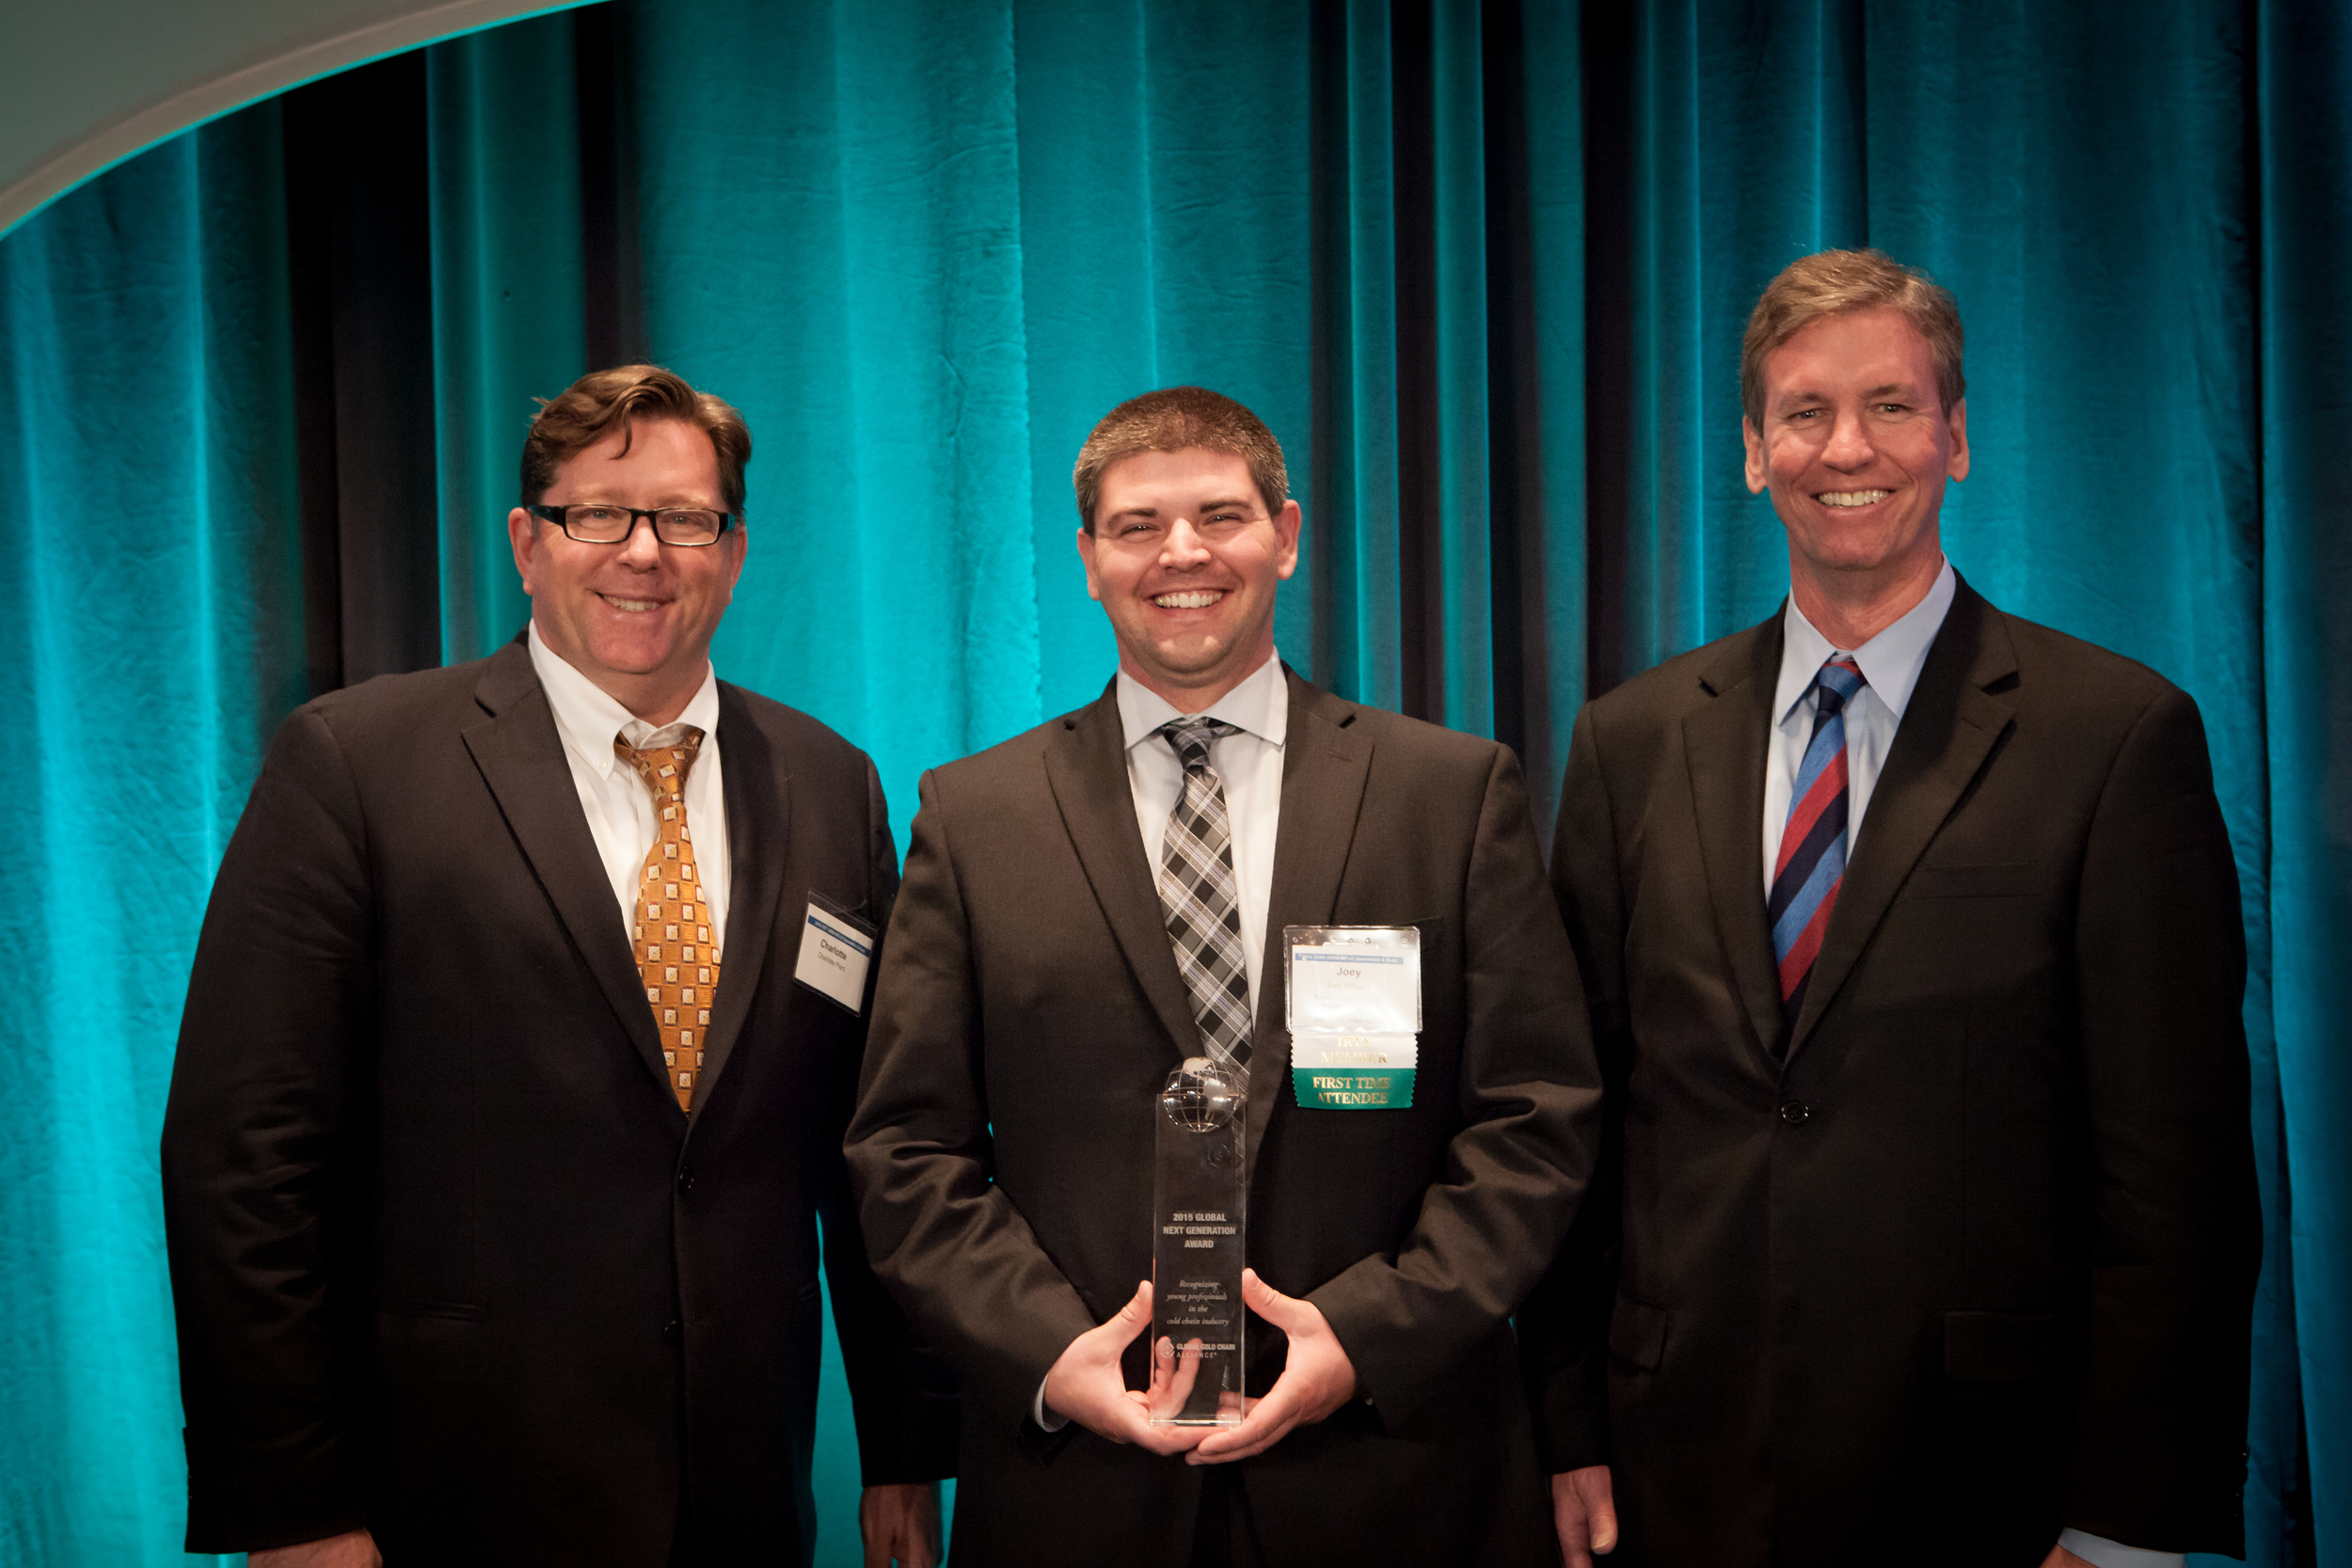     2014-2015 WFLO Chairman Frank Plant (left) and 2014-2015 IARW Chairman Tom Poe (right) pictured with the 2015 GCCA Global NextGen Award winner Joey Williams.   